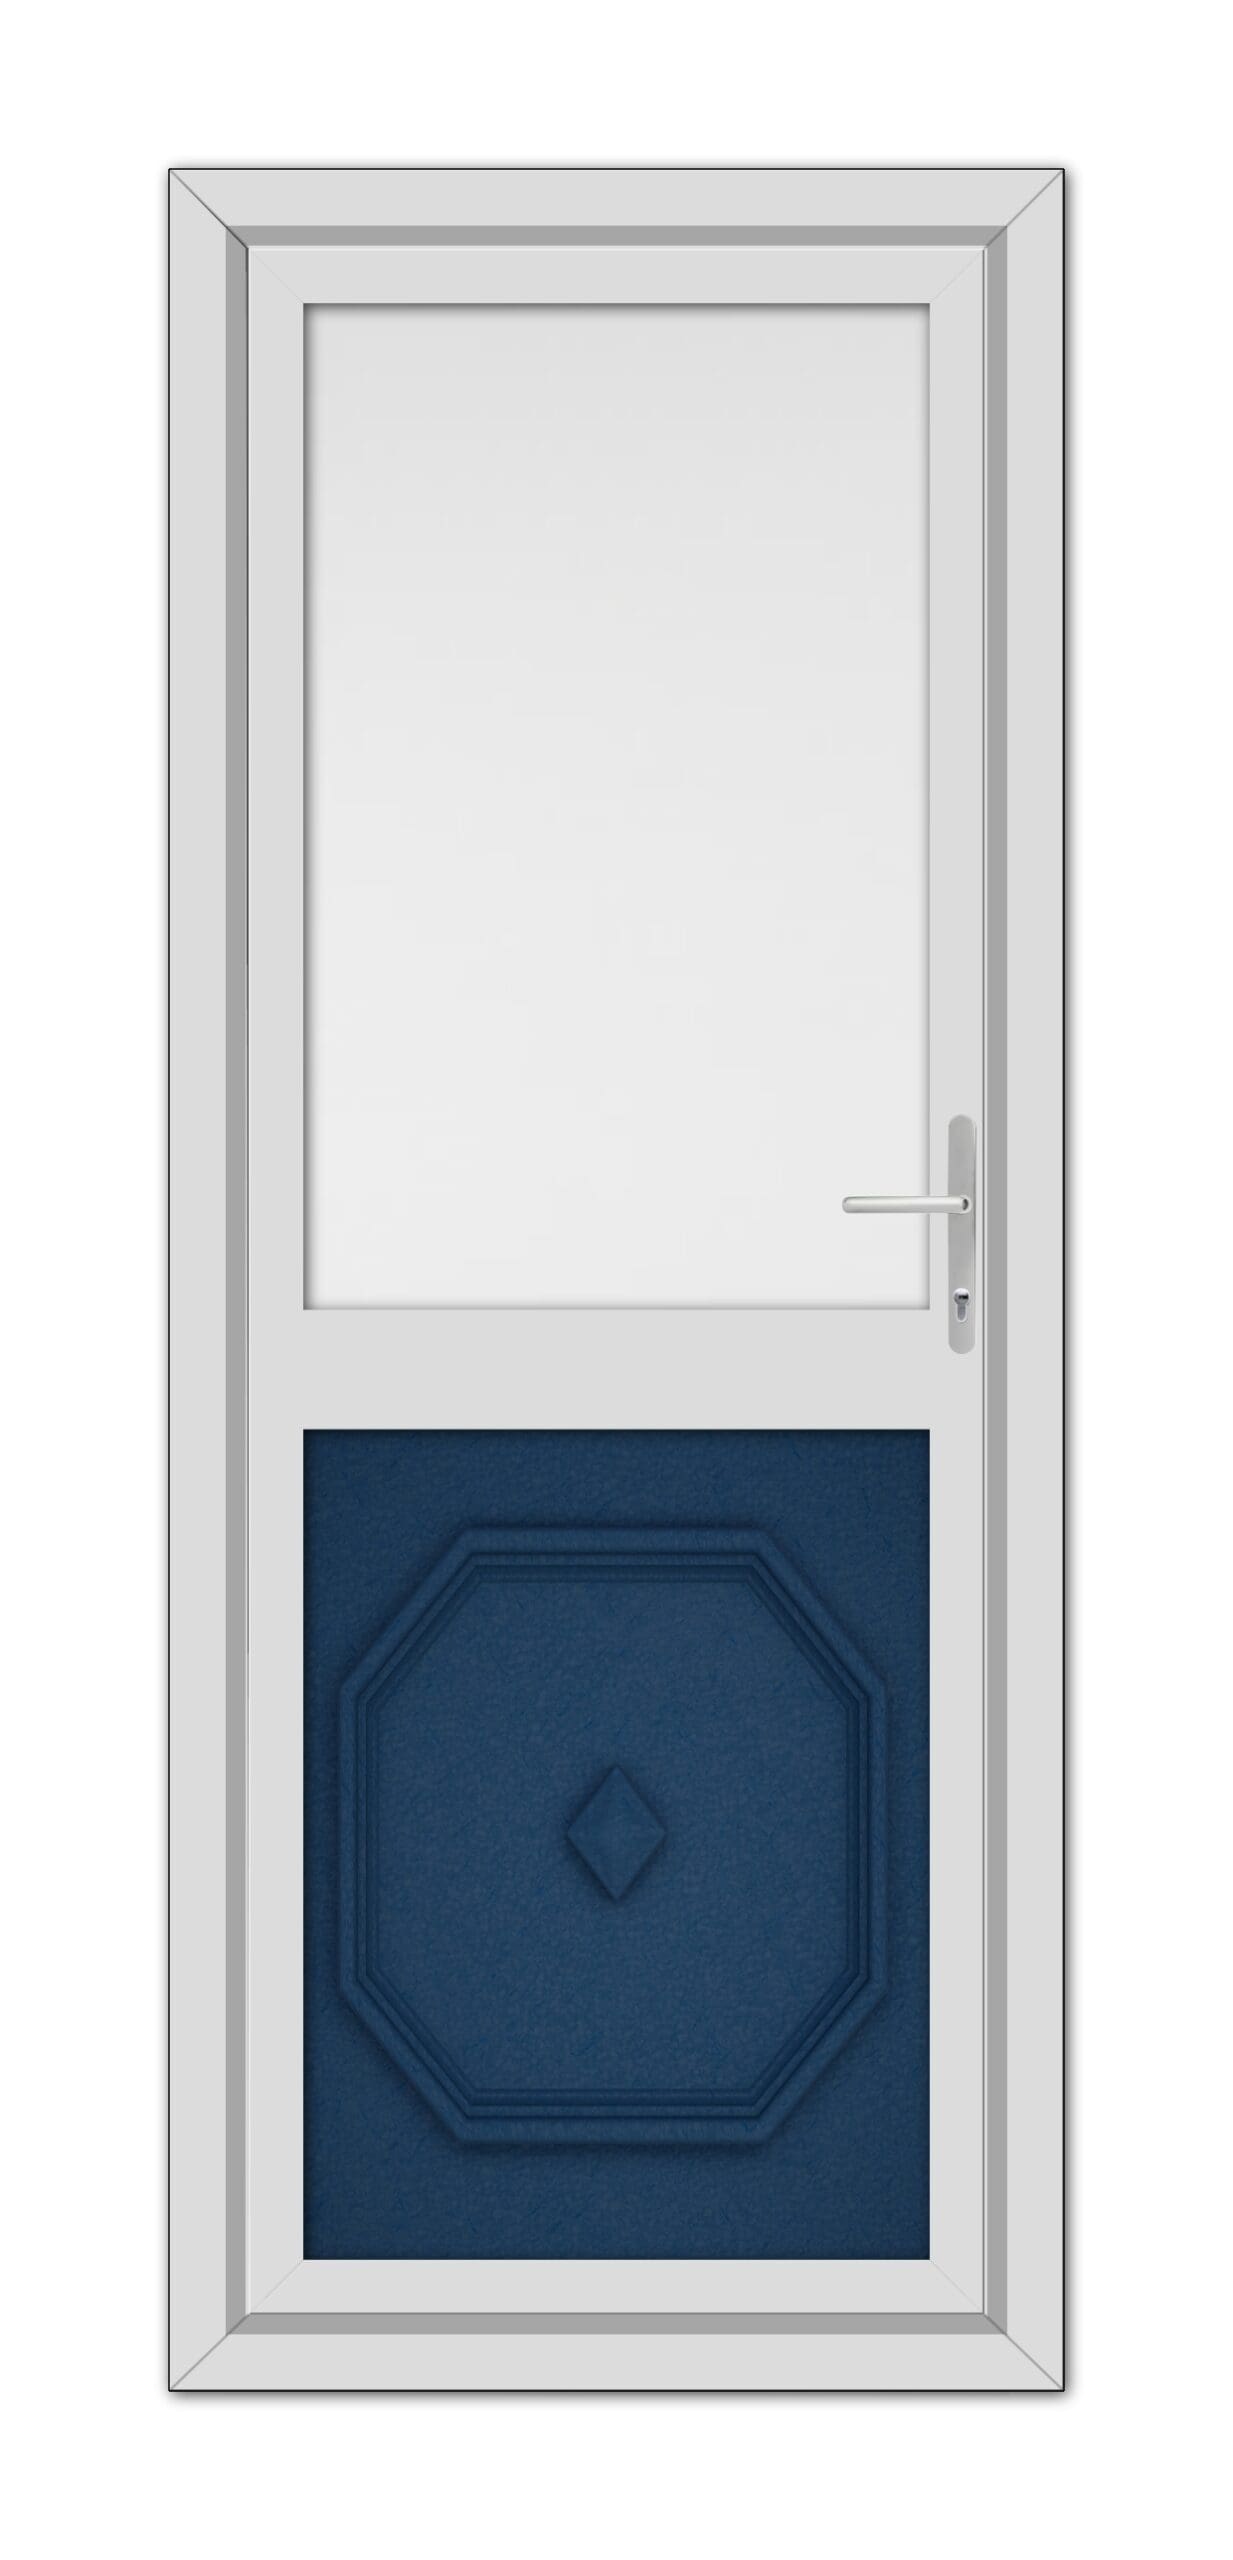 A modern Blue Westminster Half uPVC Back Door with a white frame and a blue lower panel featuring an octagonal design, complete with a silver handle.